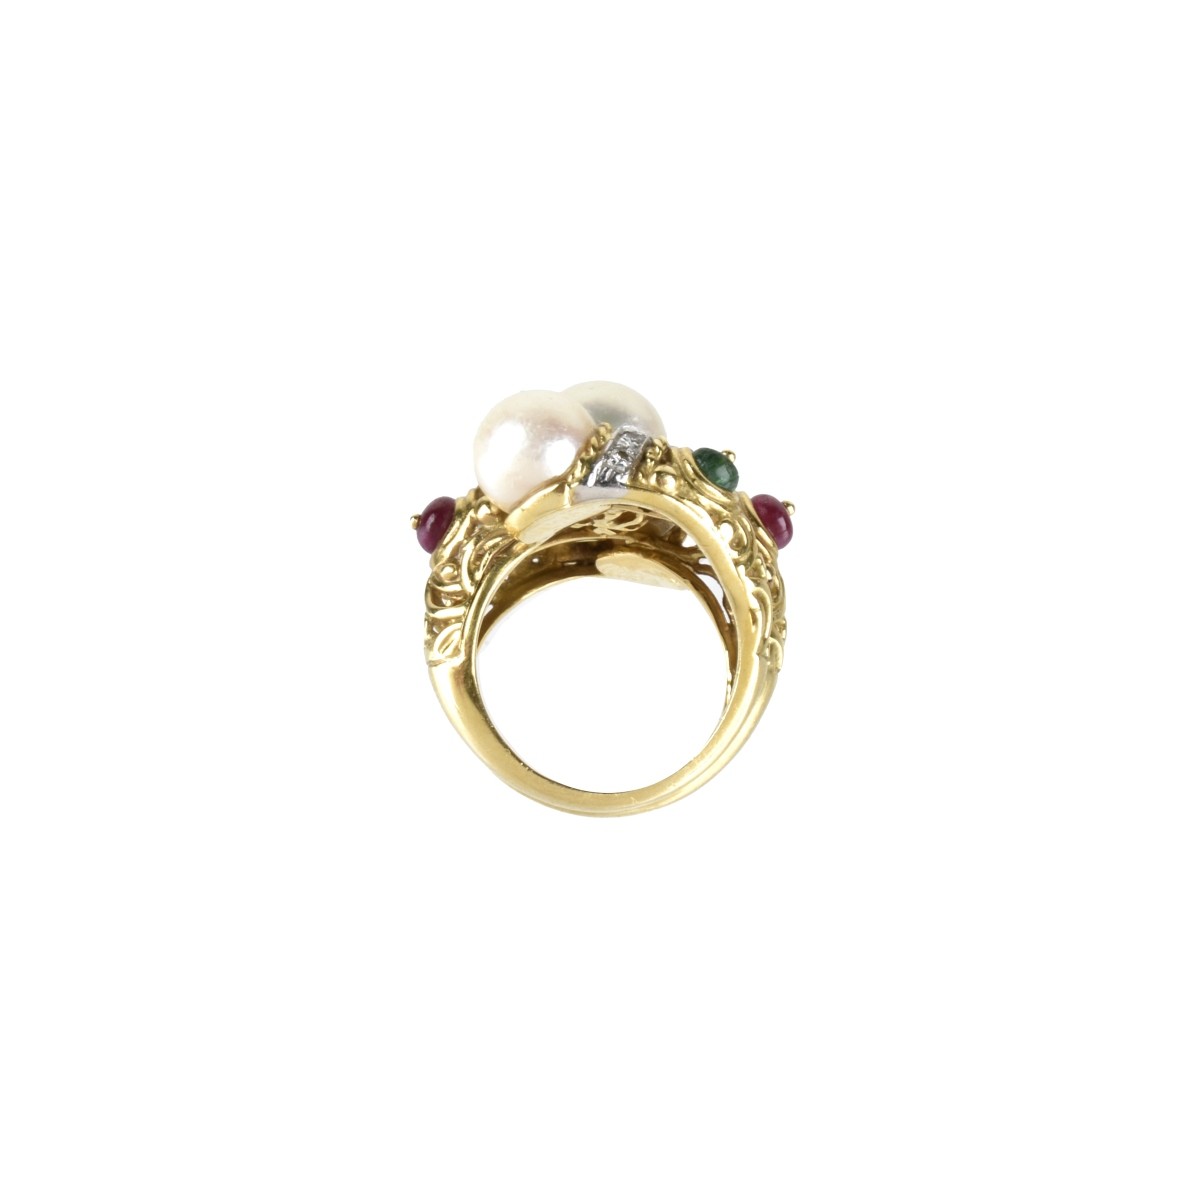 Gemstone, Pearl and 18K Ring